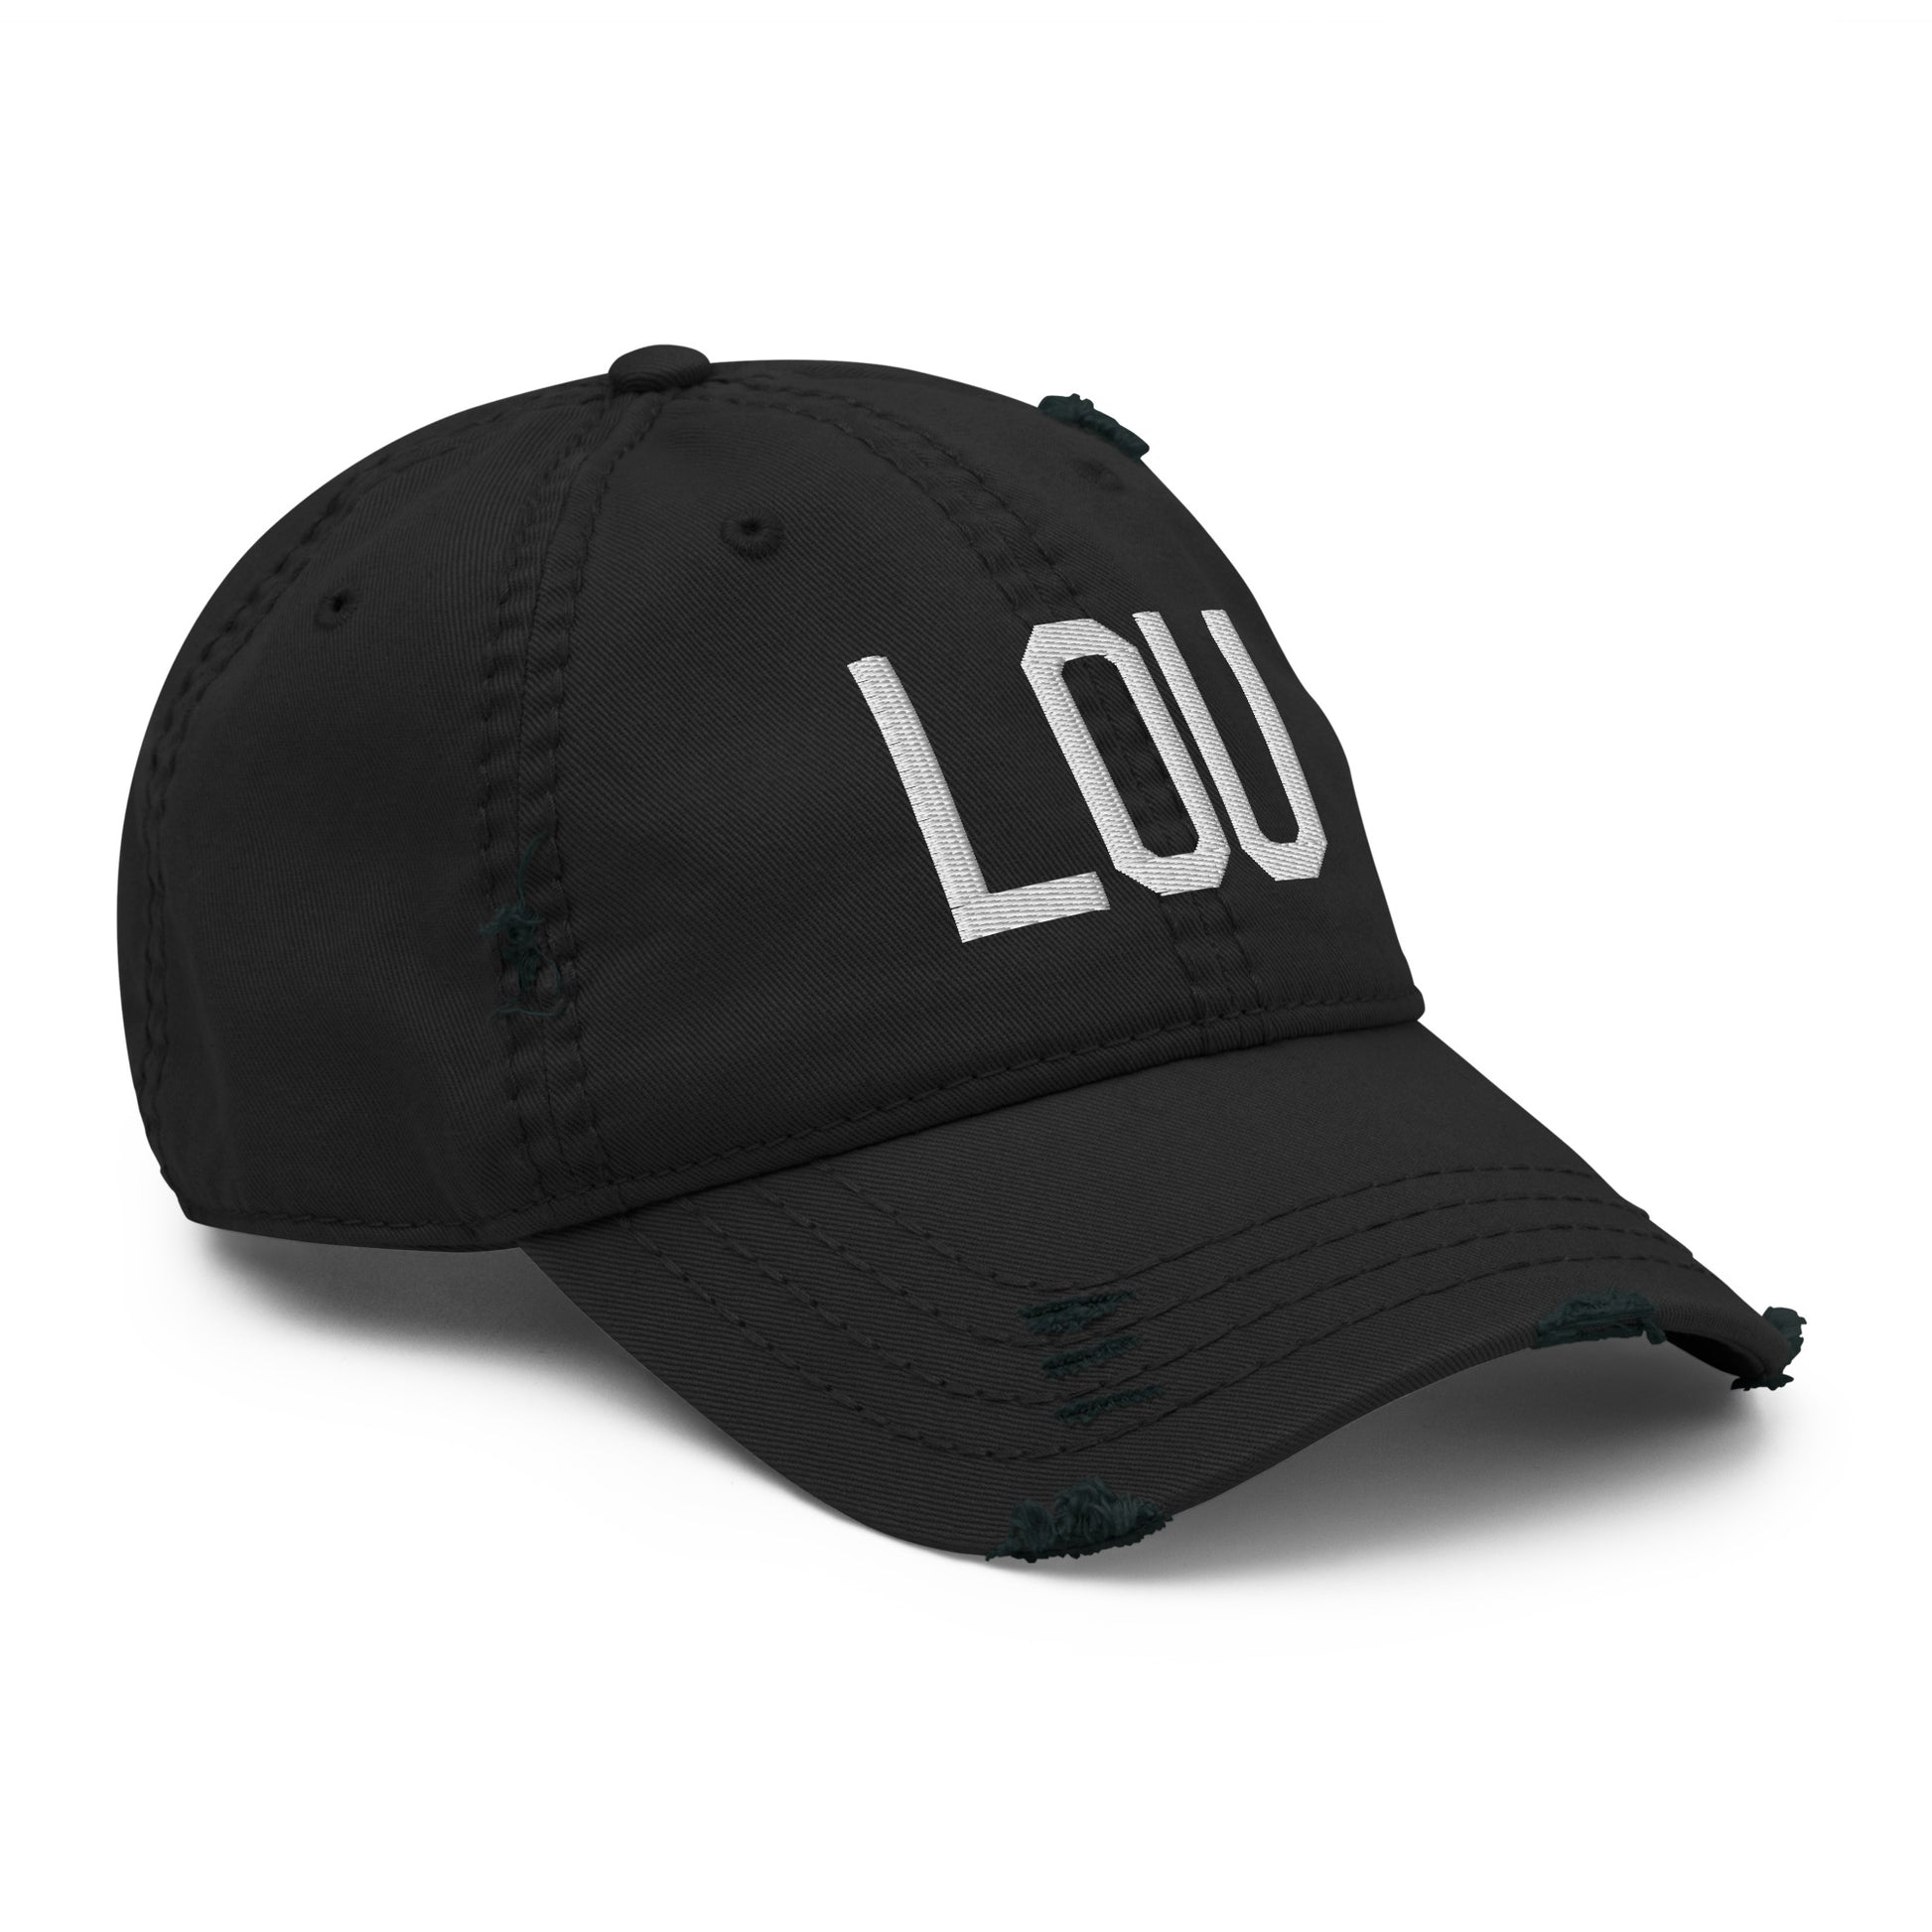 Airport Code Distressed Hat - White • LOU Louisville • YHM Designs - Image 12